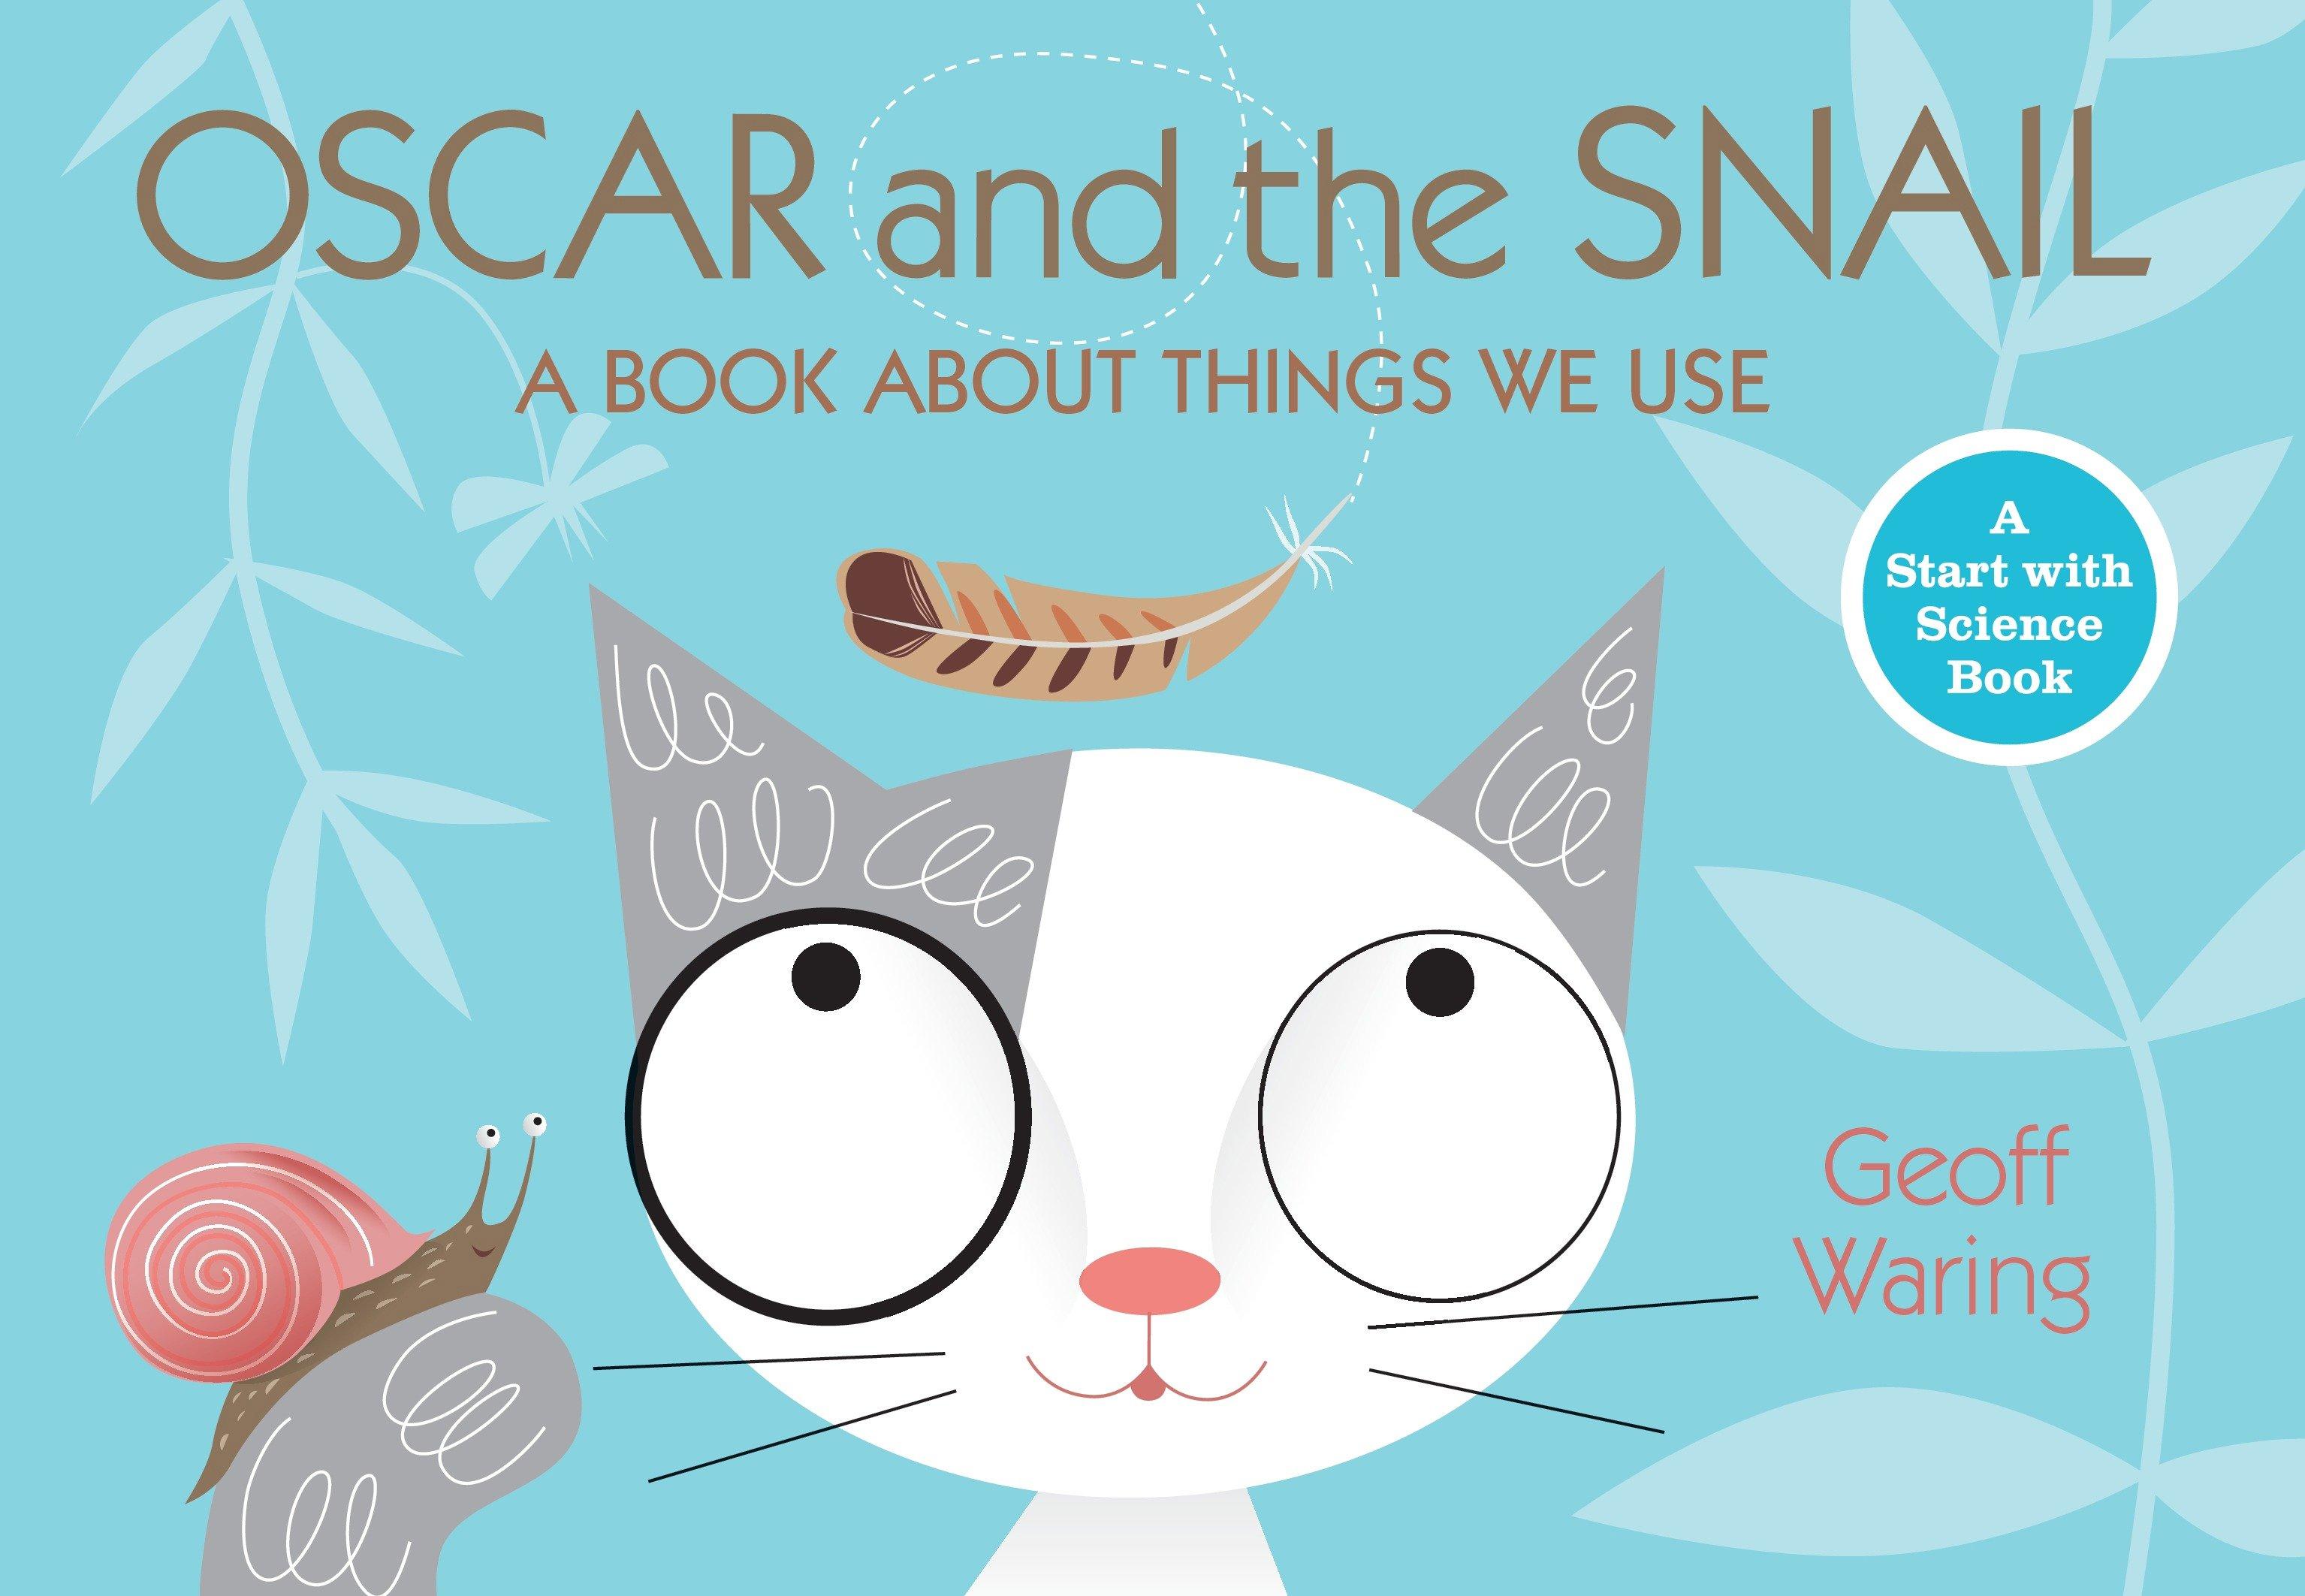 Oscar and the Snail - Geoff Waring